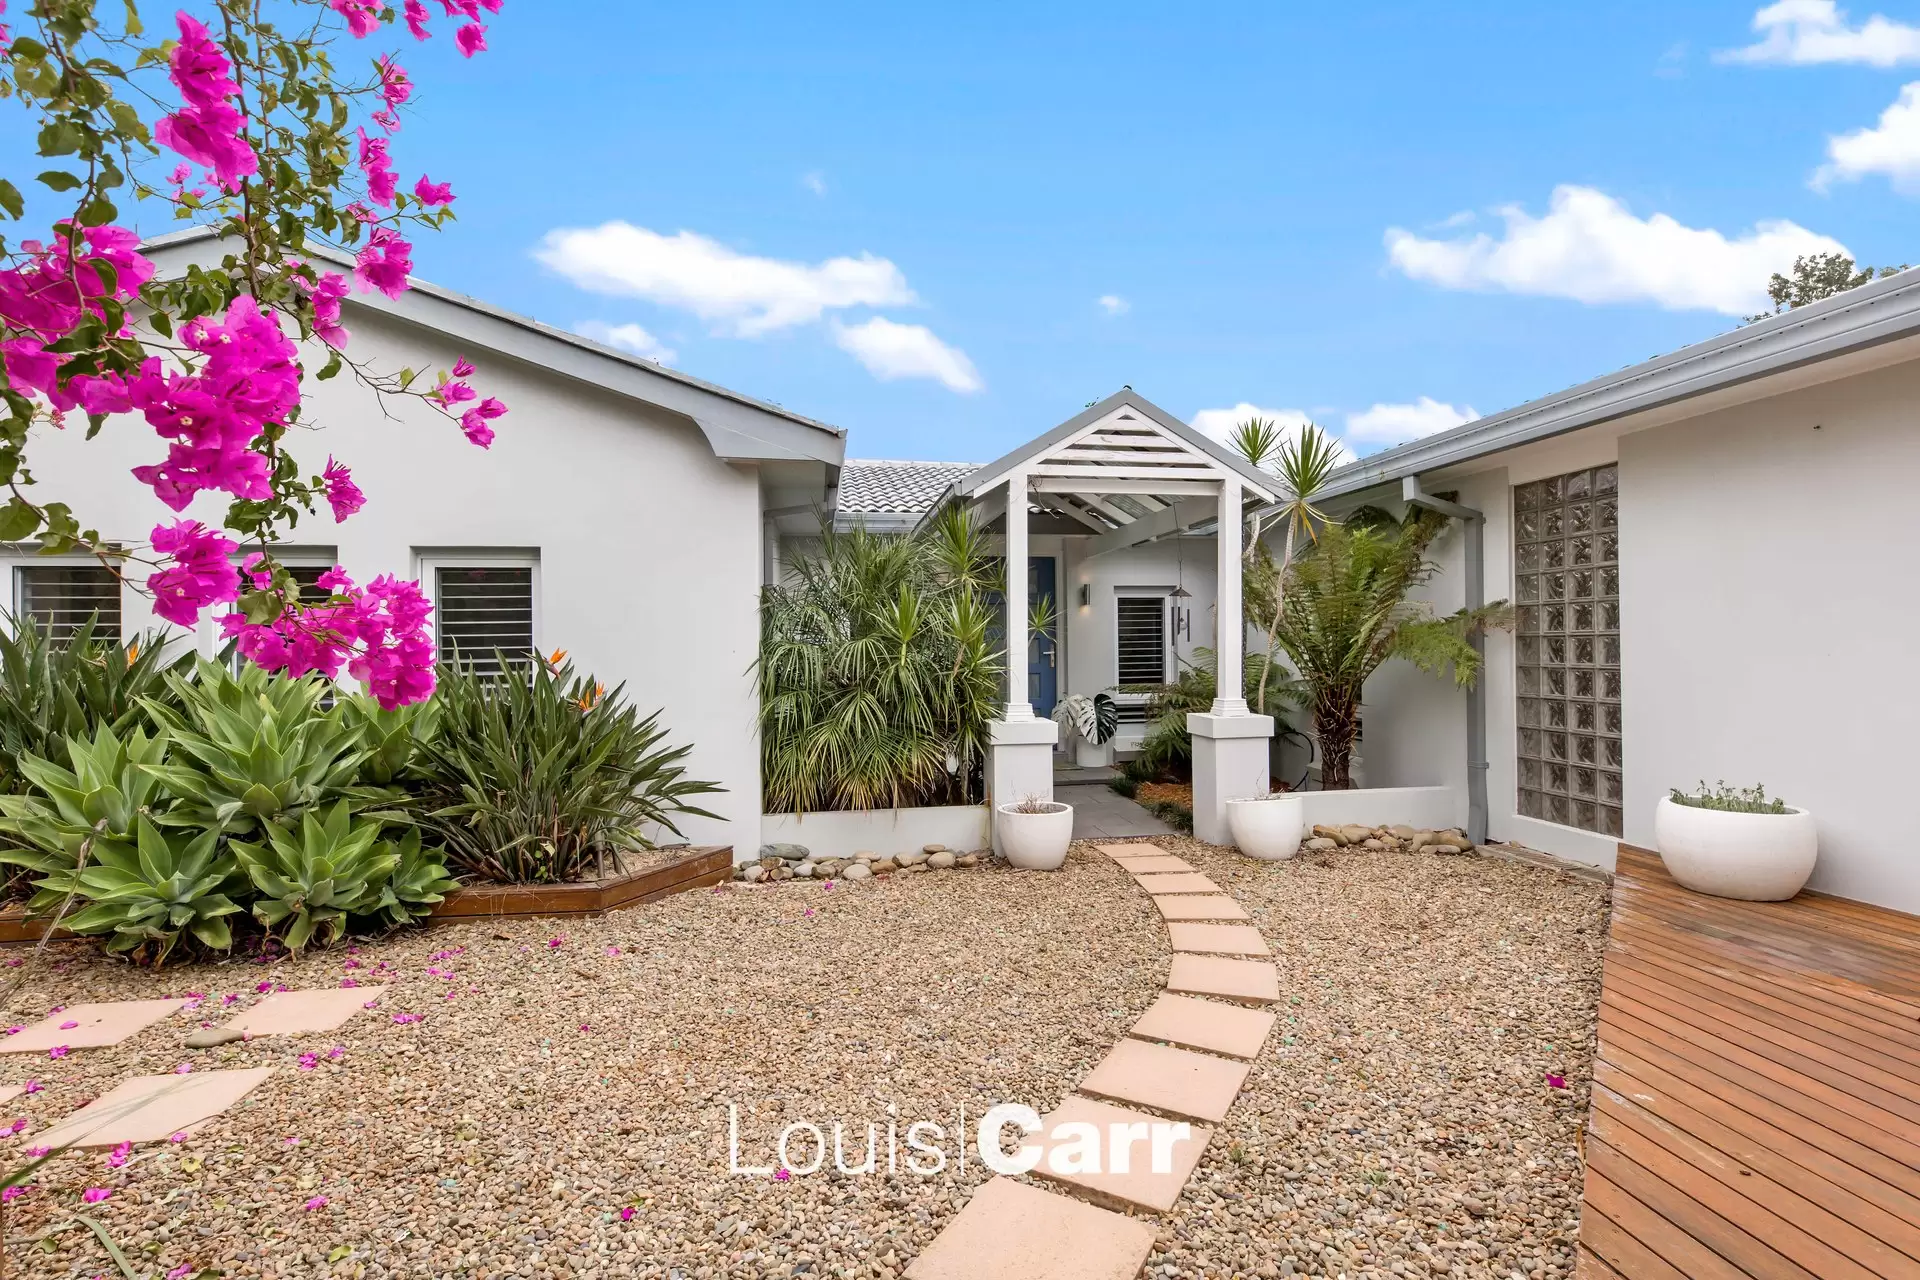 9 Finley Place, Glenhaven Sold by Louis Carr Real Estate - image 1